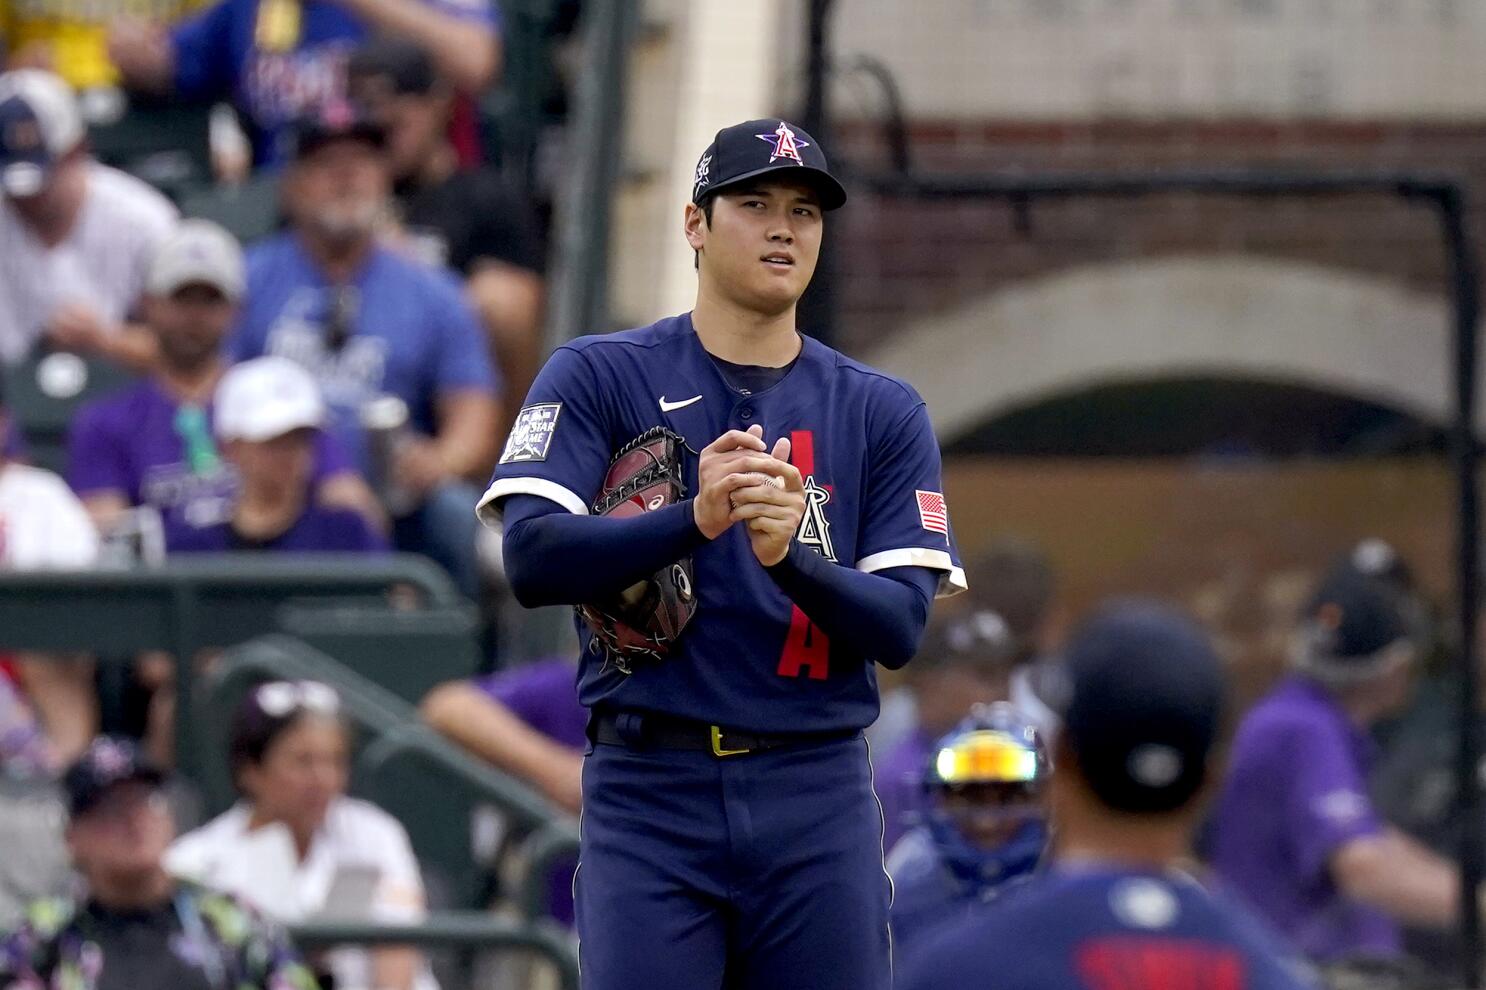 Shohei Ohtani solidifies role as baseball's biggest attraction in